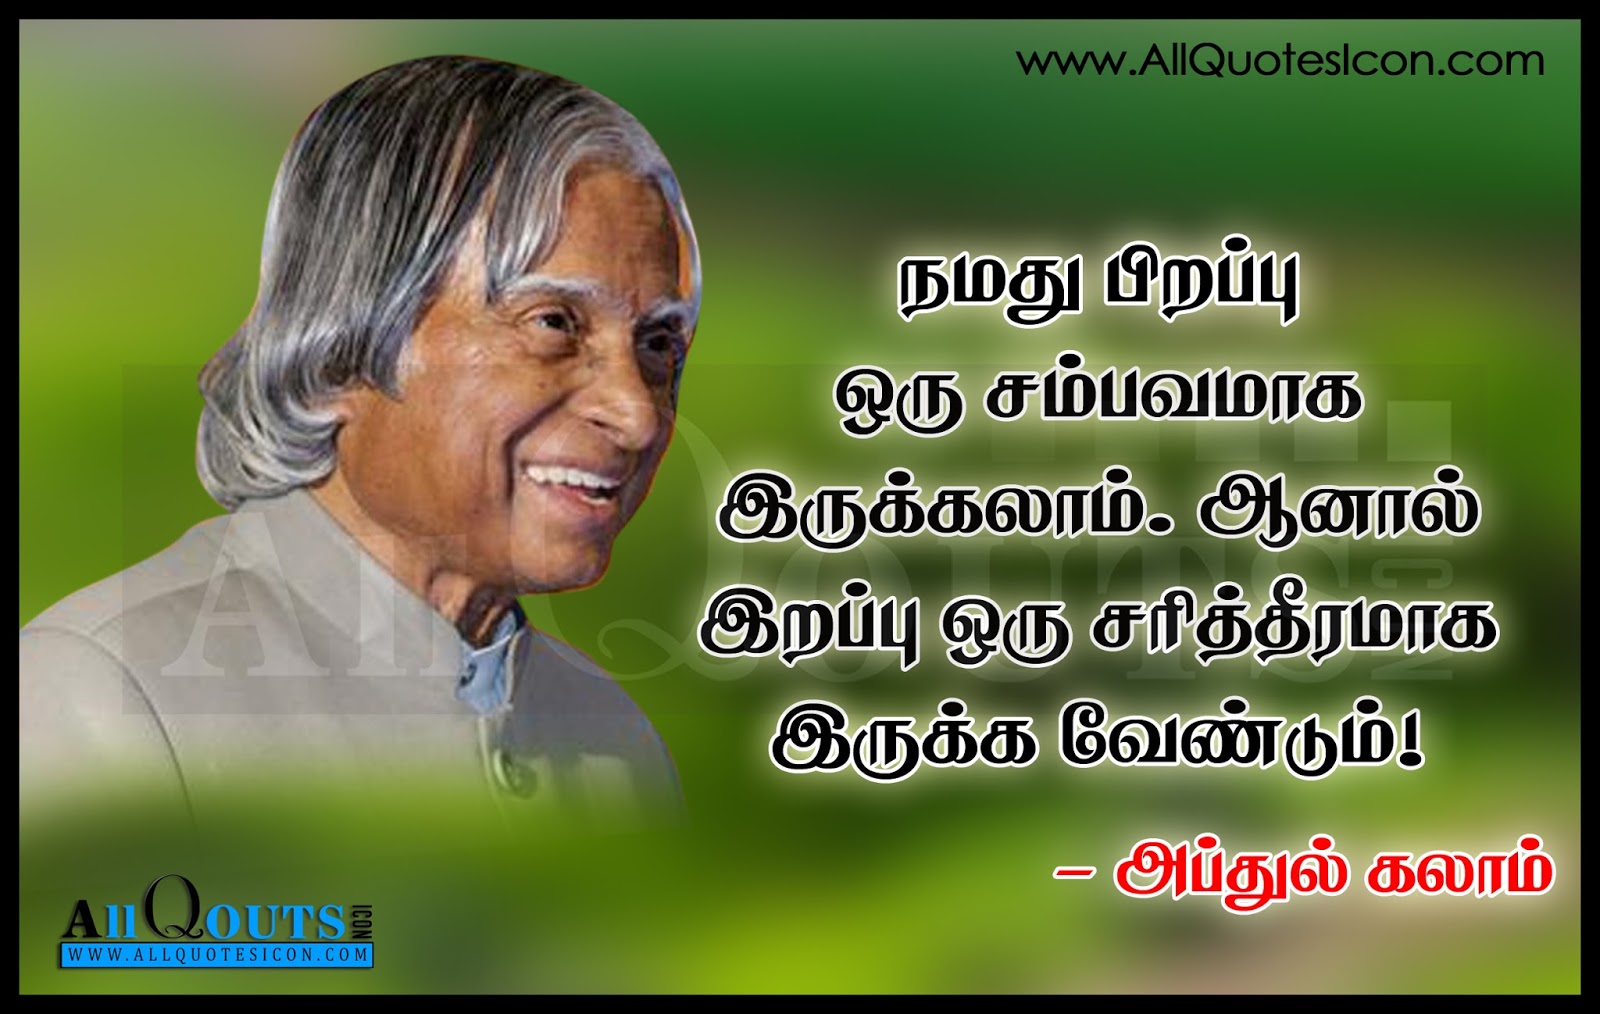 Abdul Kalam Ward Tamil Quotes Images Wallpapers Pictures - Abdul Kalam Student Motivational Quotes , HD Wallpaper & Backgrounds